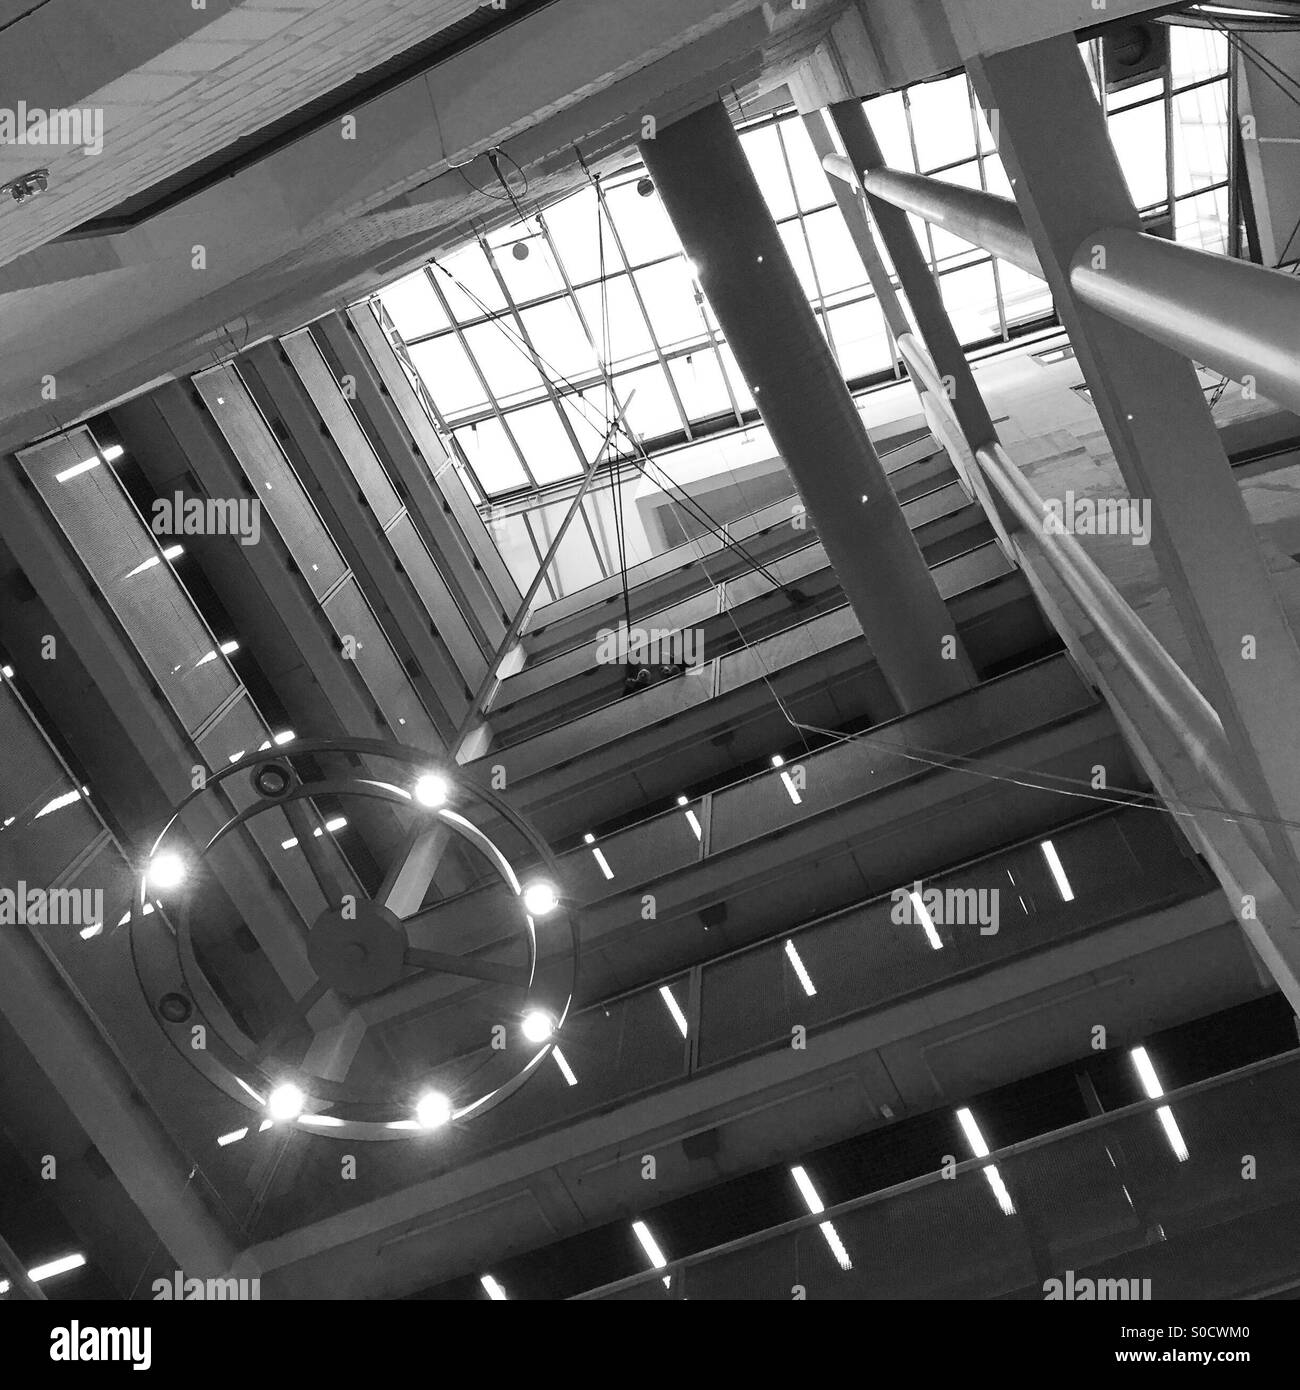 Looking up inside the atrium of a harbour building in Hamburg Stock Photo